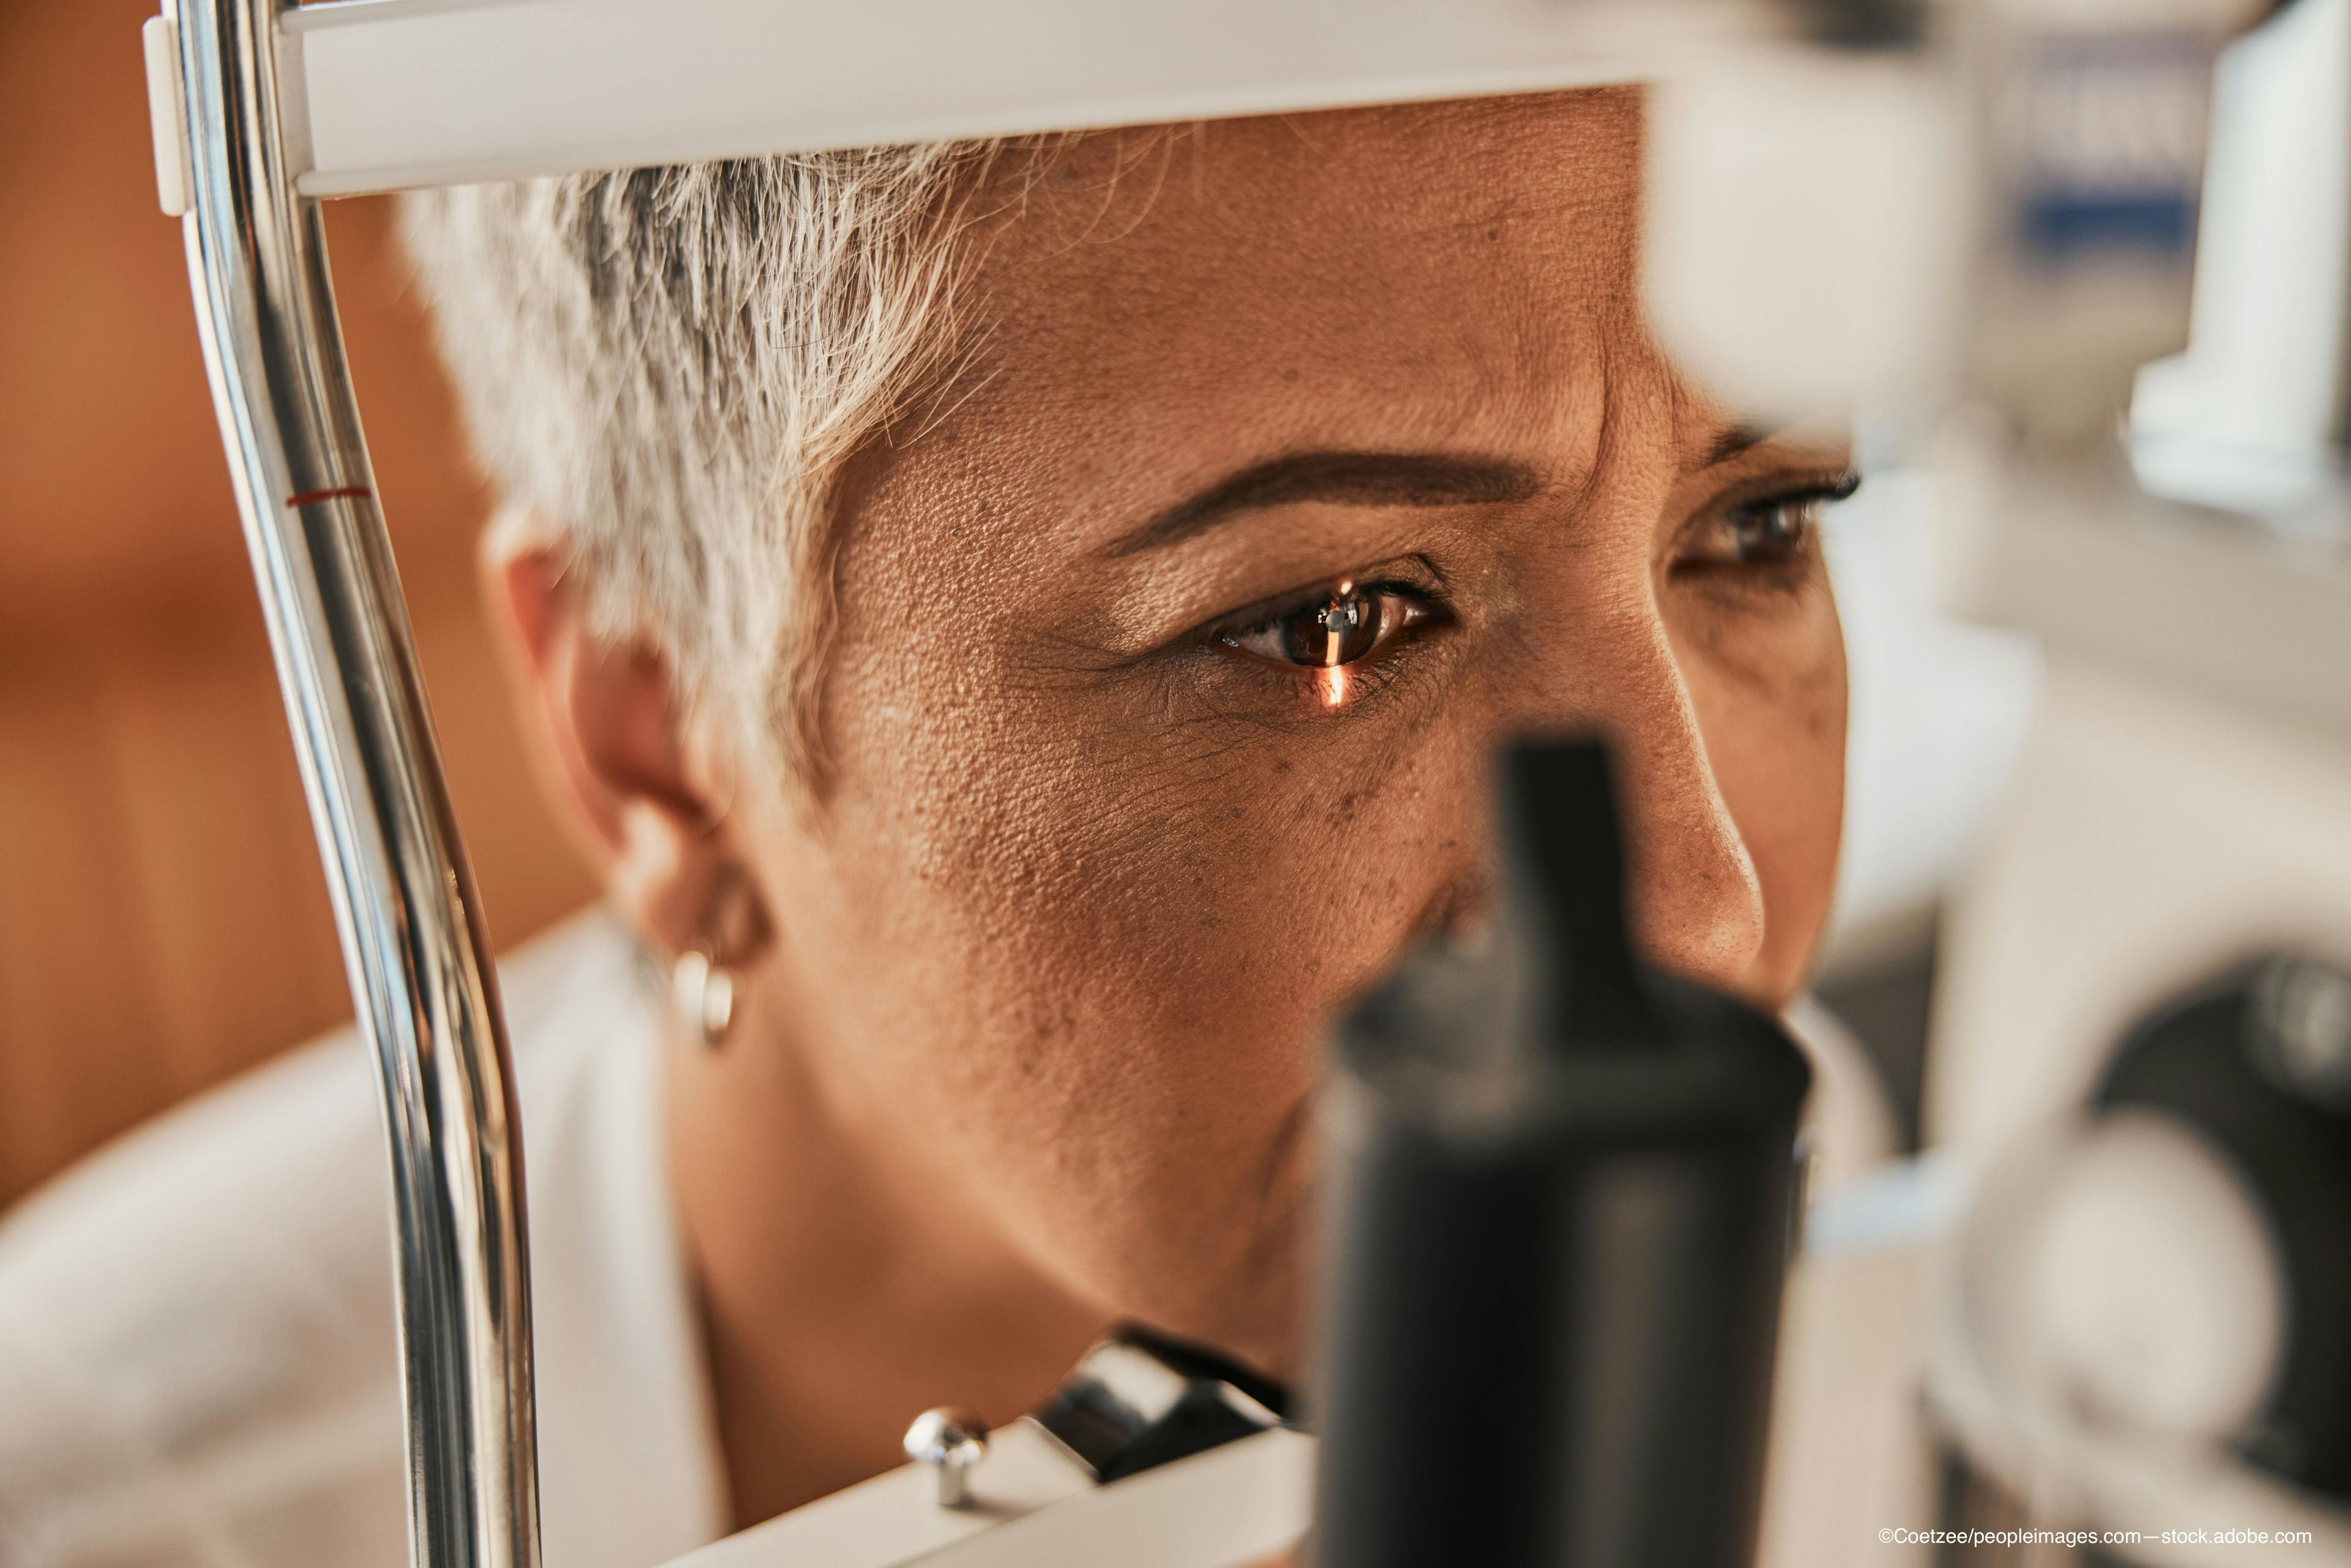 woman getting an eye exam from a retina specialist - Image credit: Adobe Stock / Coetzee/peopleimages.com